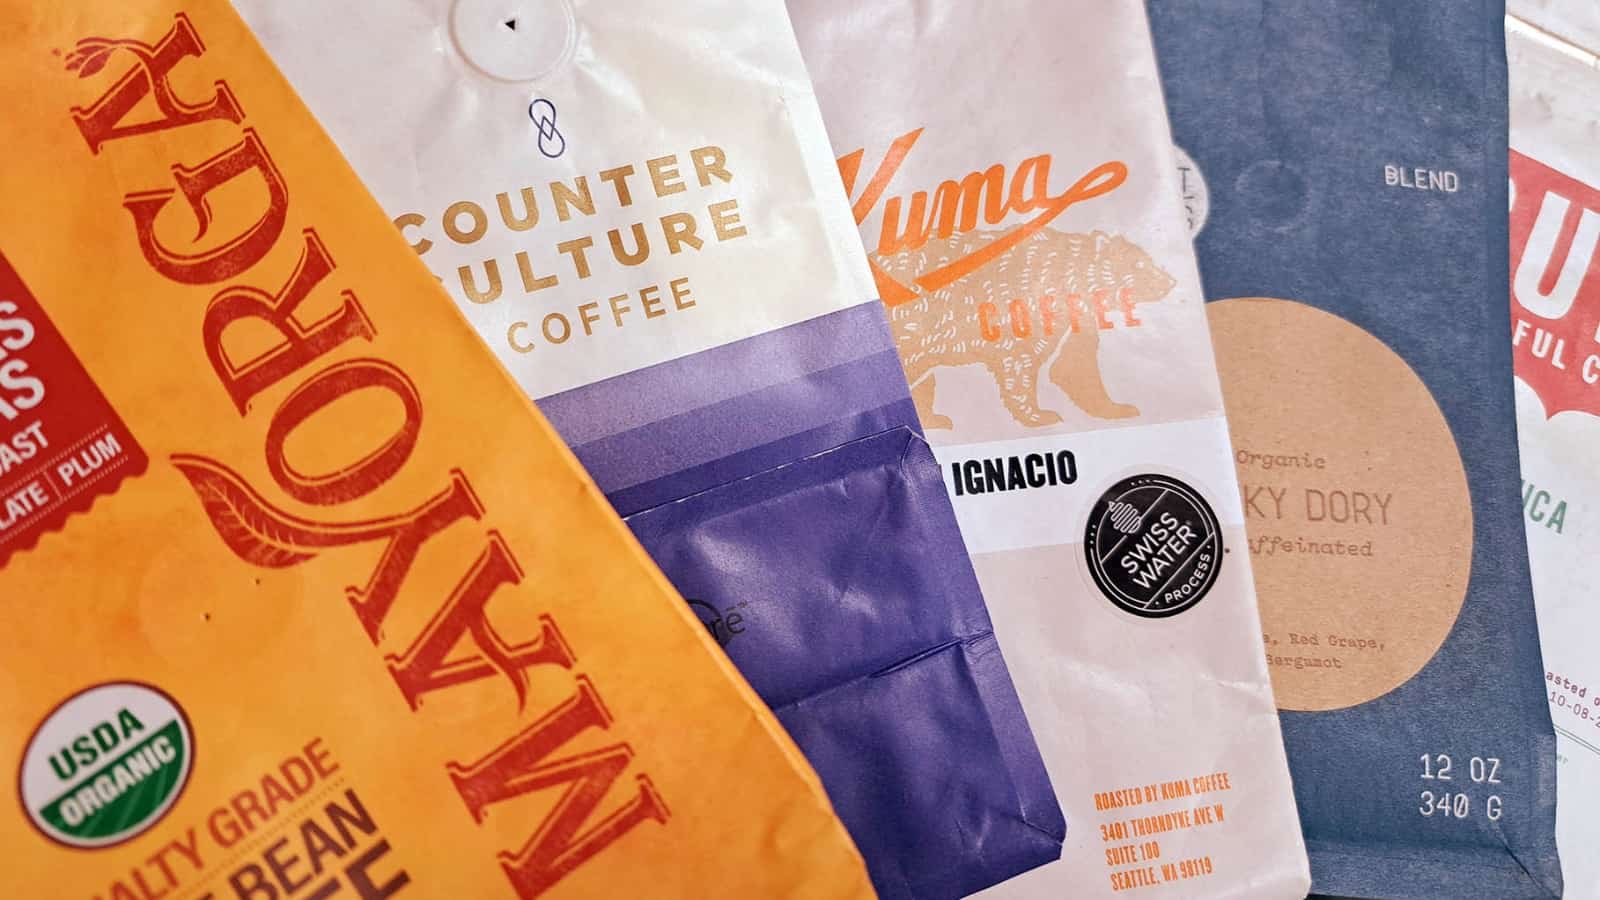 an array of empty coffee bags from coffee roasters such as Mayorga coffee, Counter Culture coffee, and Kuma coffee